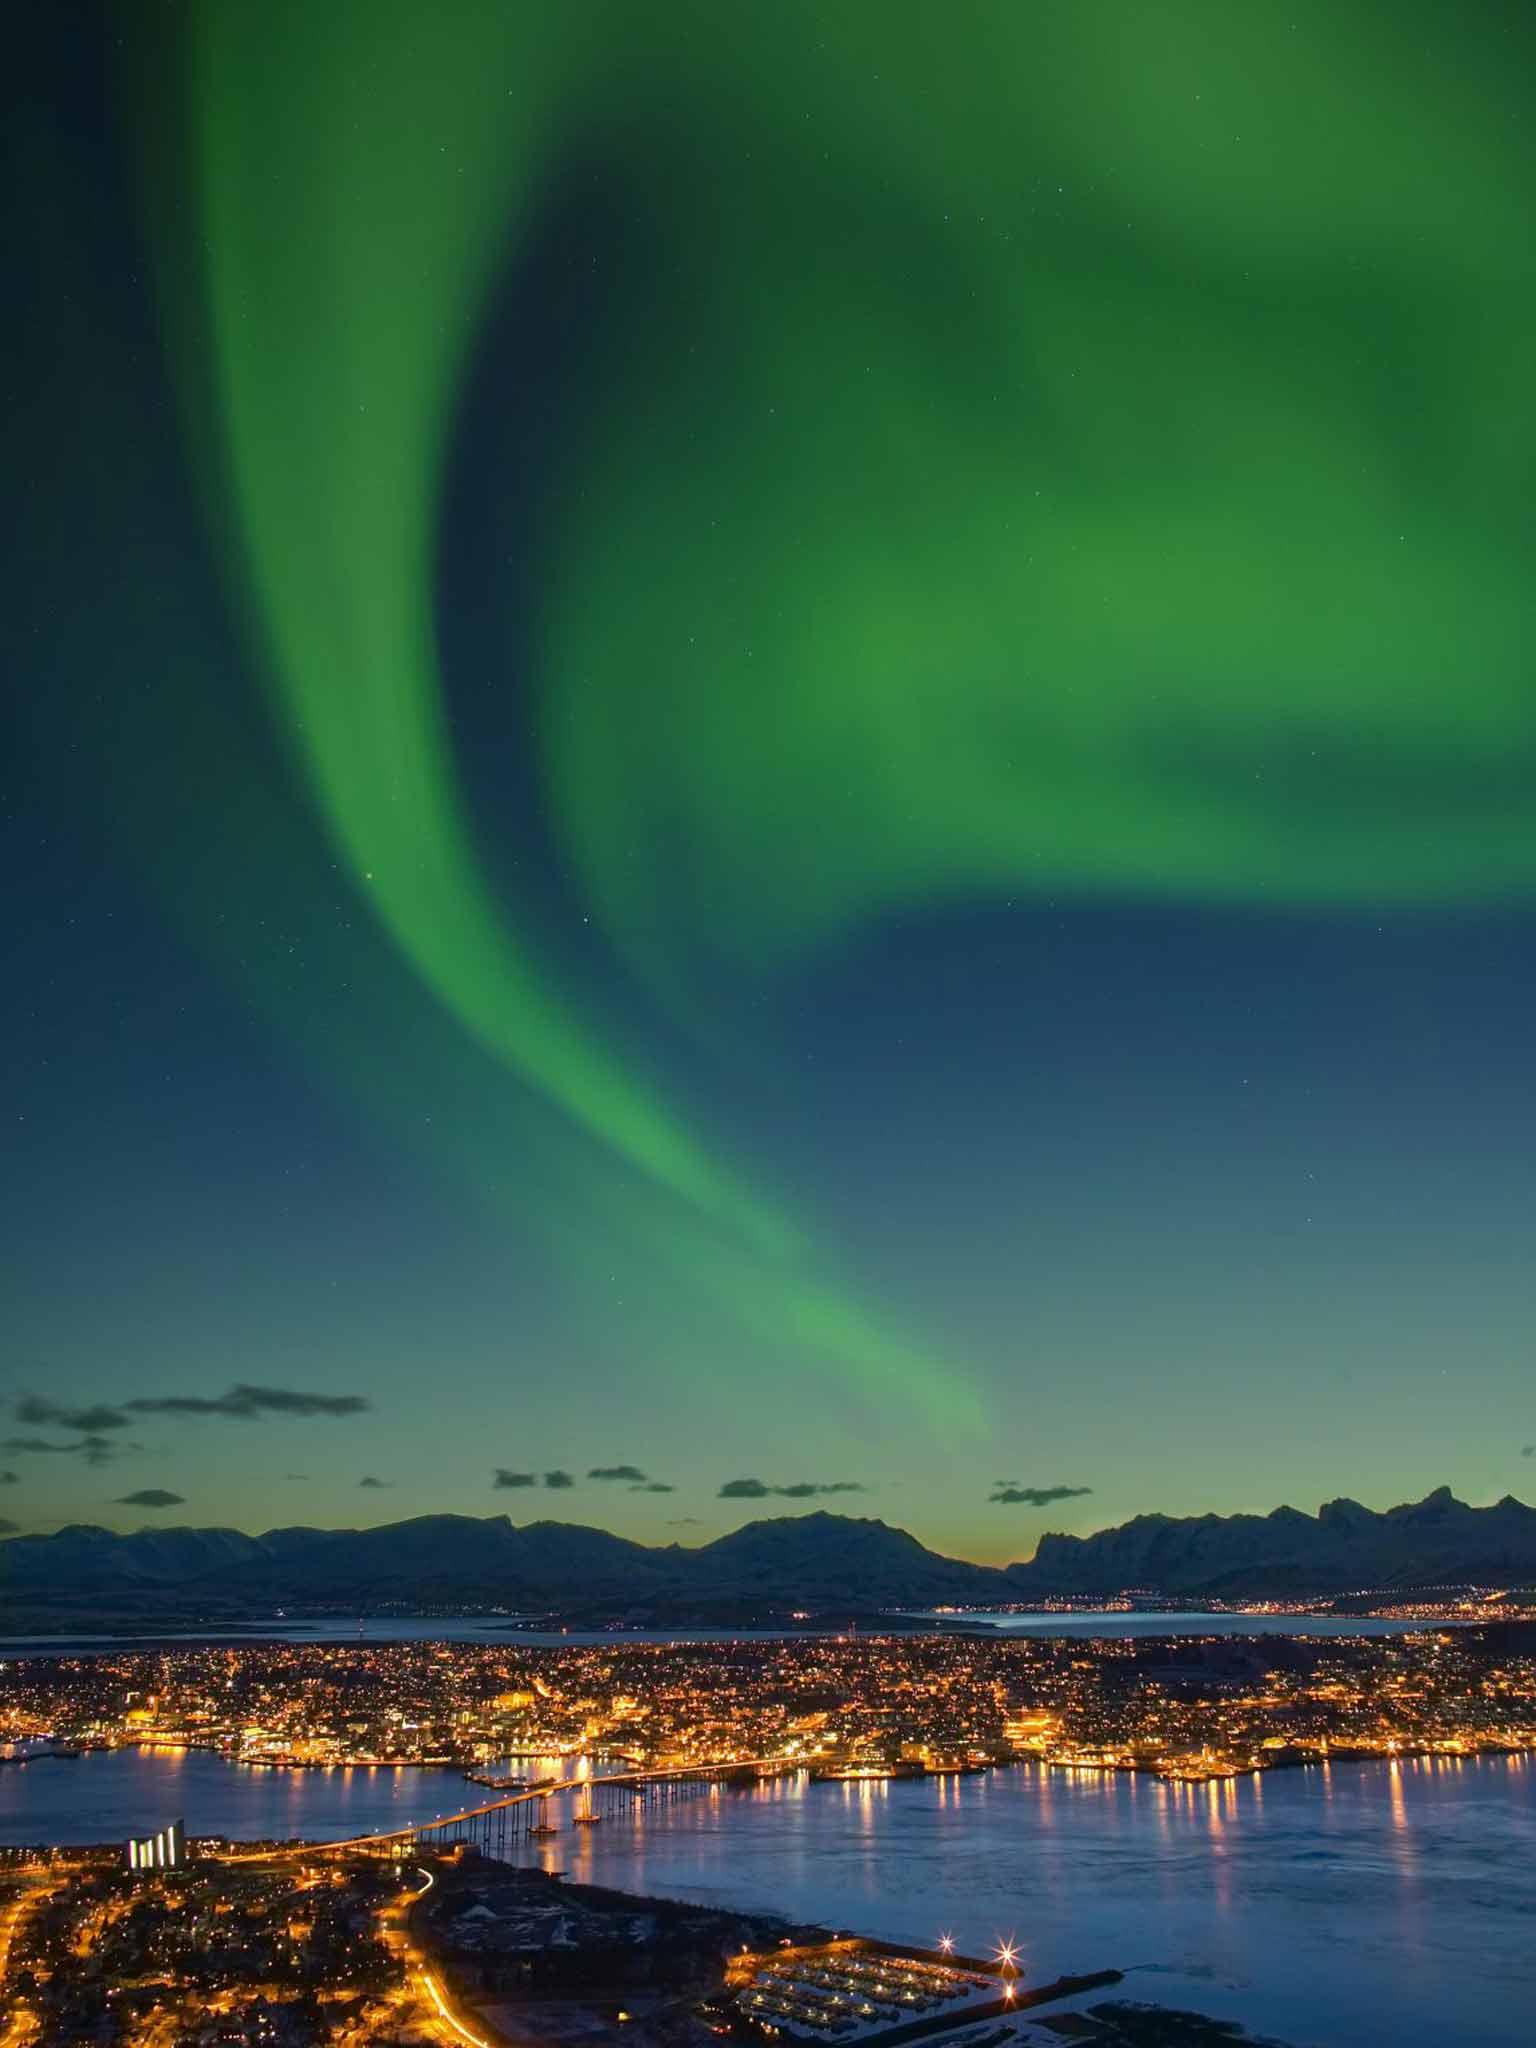 There’s a high probability of seeing the lights in Tromso